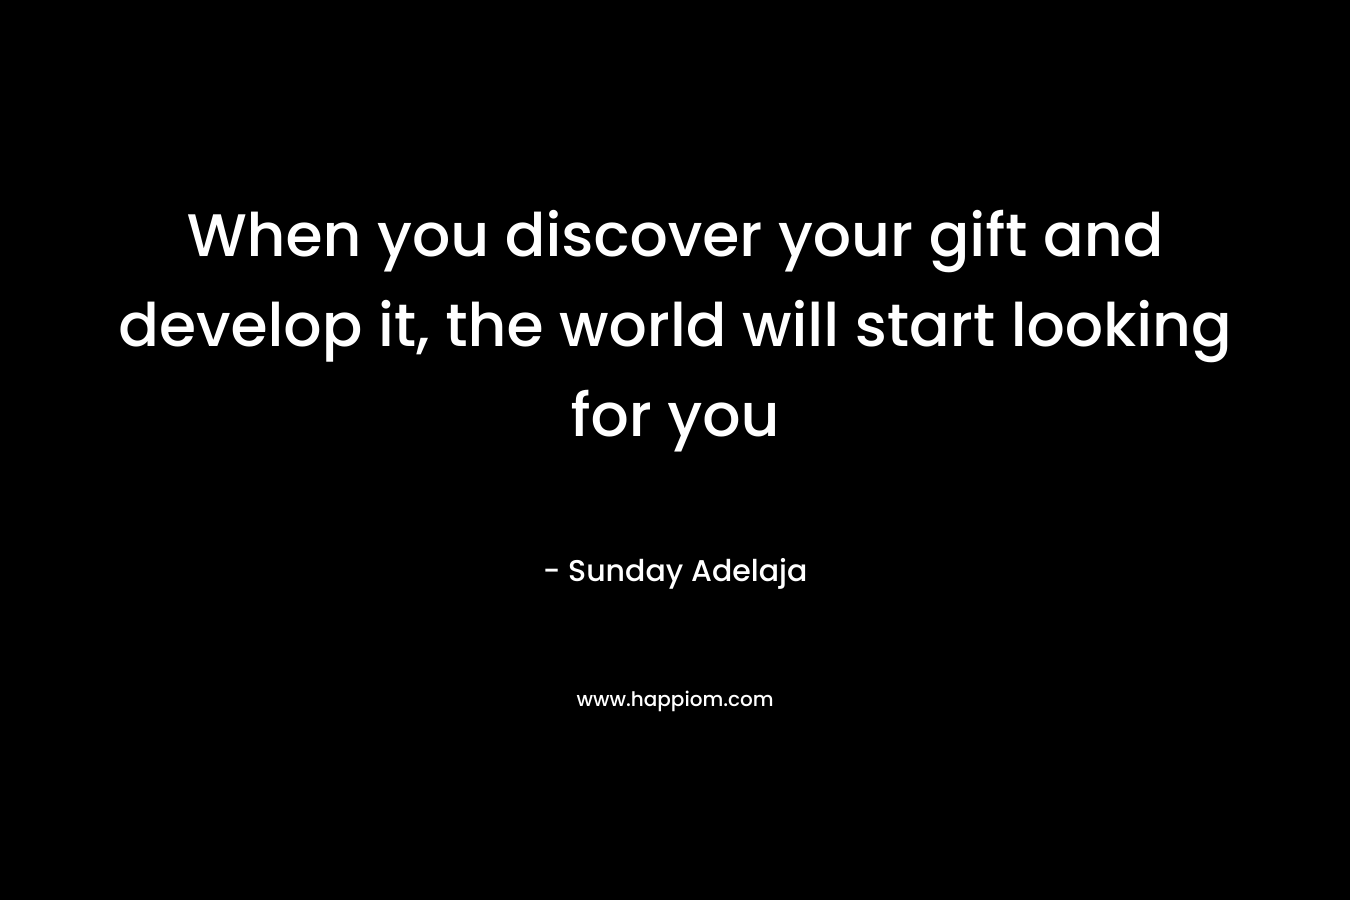 When you discover your gift and develop it, the world will start looking for you